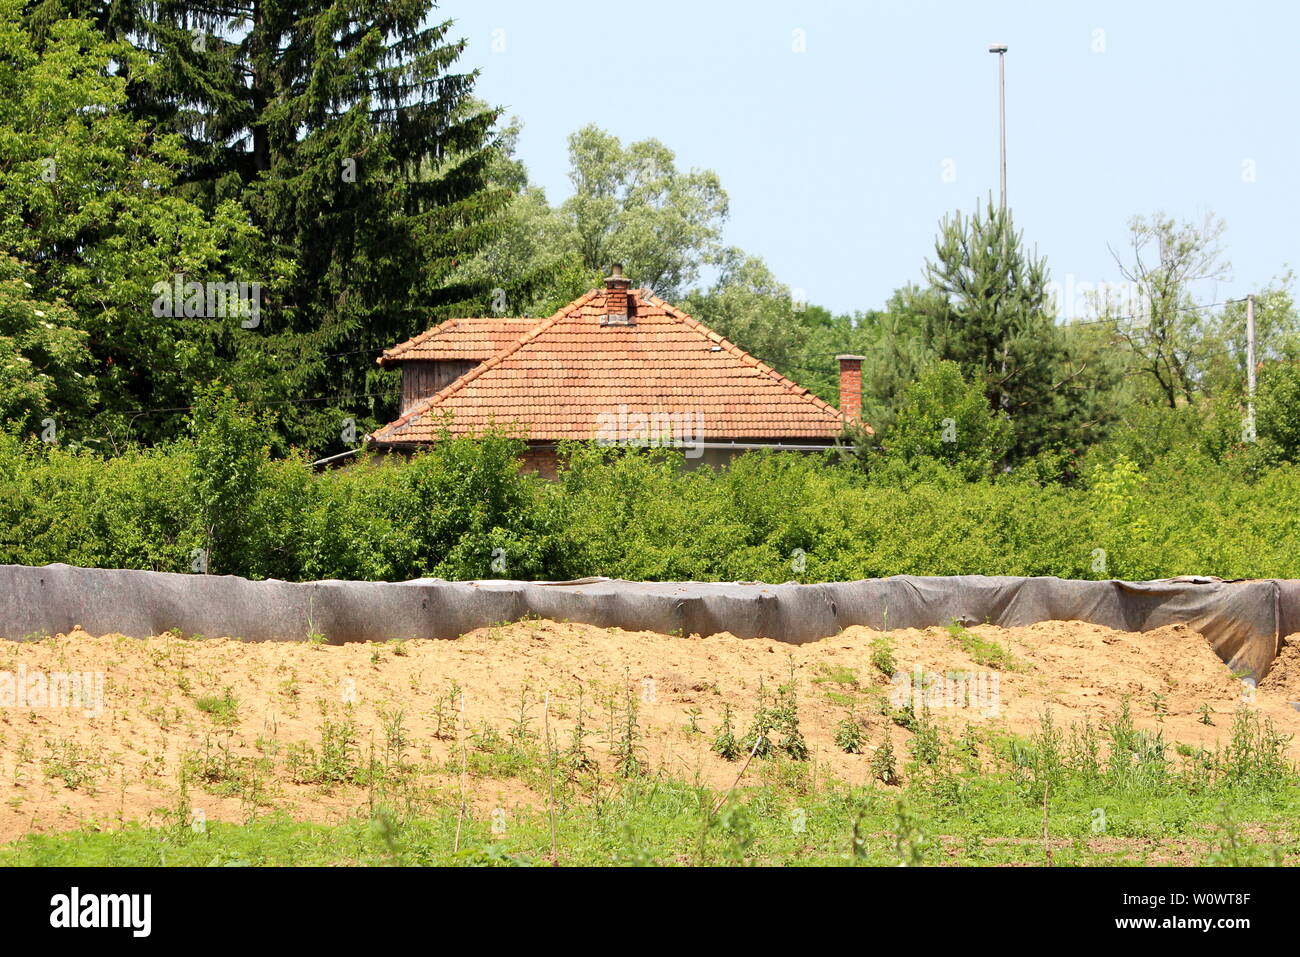 Barely visible family house red roof tiles behind temporary box barriers flood protection covered with dark grey geotextile fabric Stock Photo